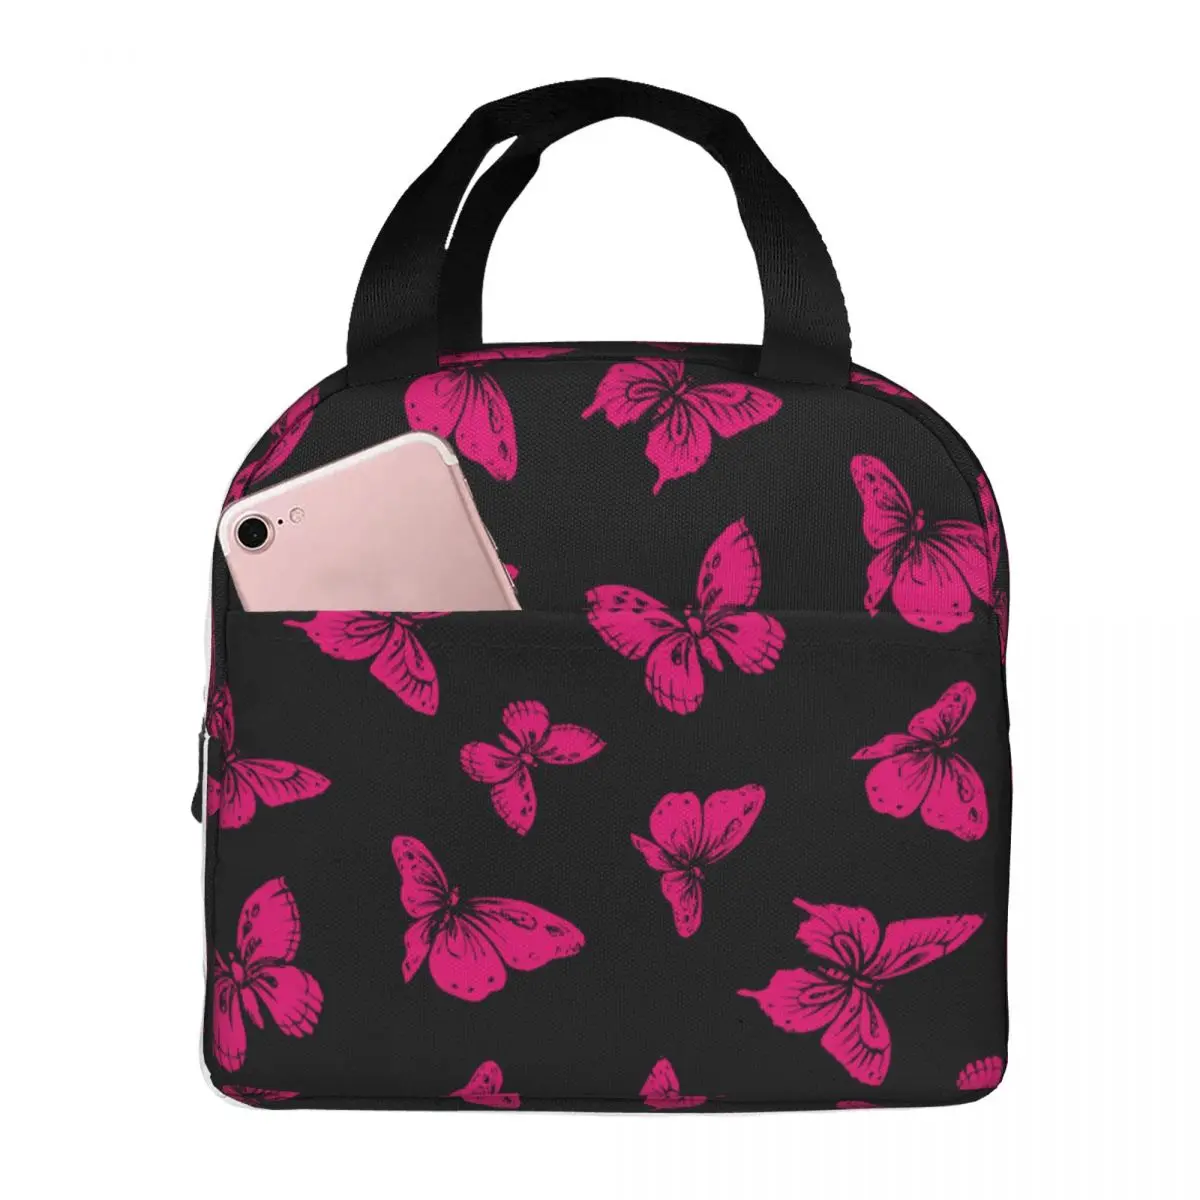 Butterfly Lunch Bags Portable Insulated Canvas Cooler Thermal Food School Lunch Box for Women Girl